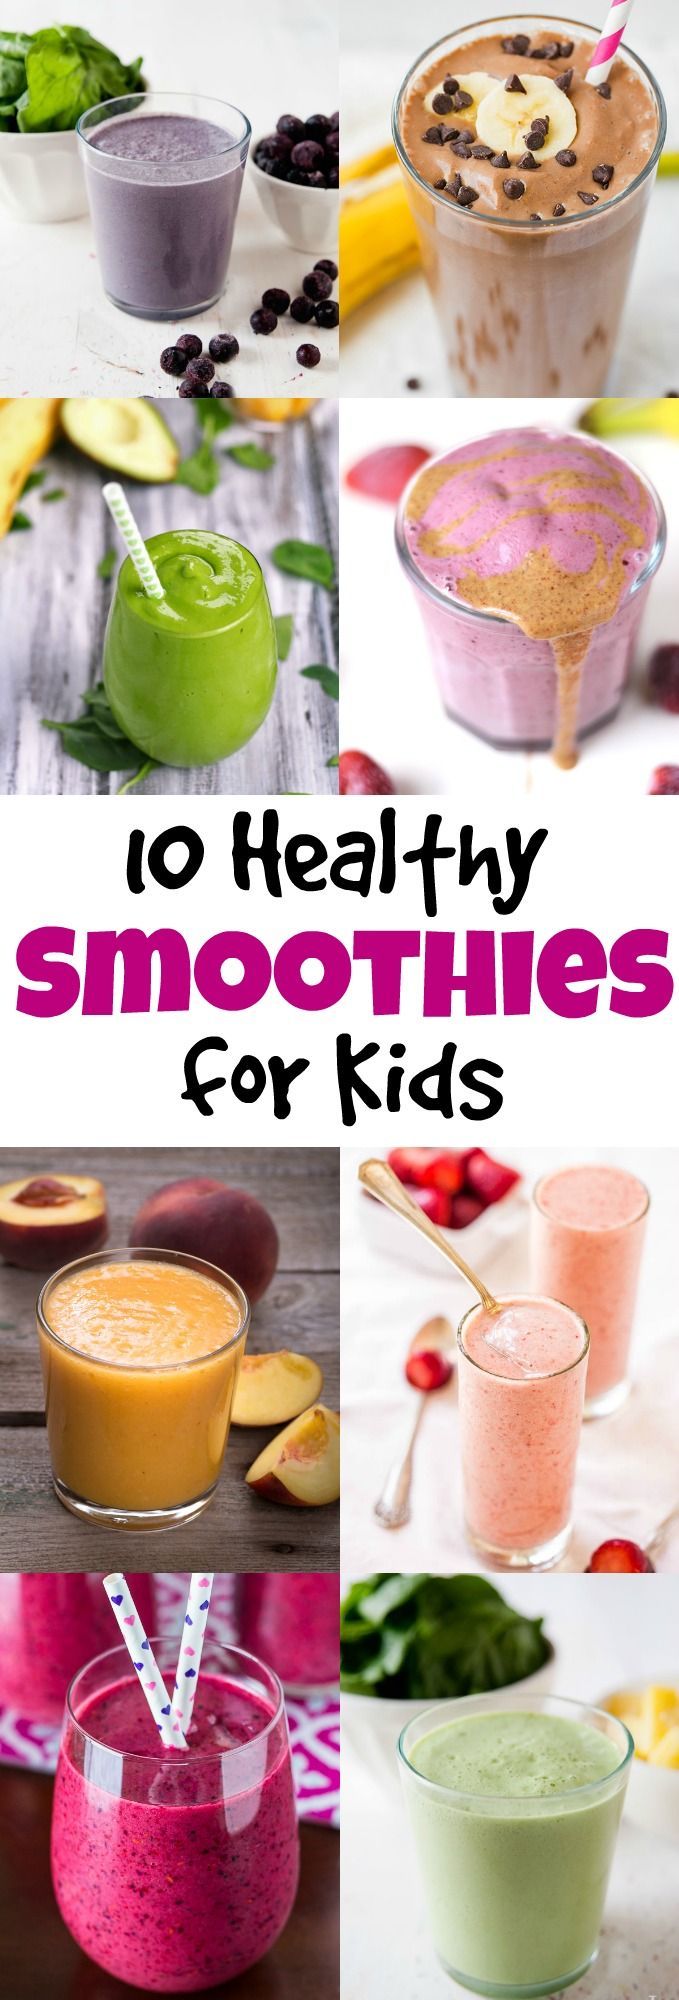 What better way to get more fruits and veggies in your kids’ diet than a refreshing smoothie! Your kids will love these smoothies